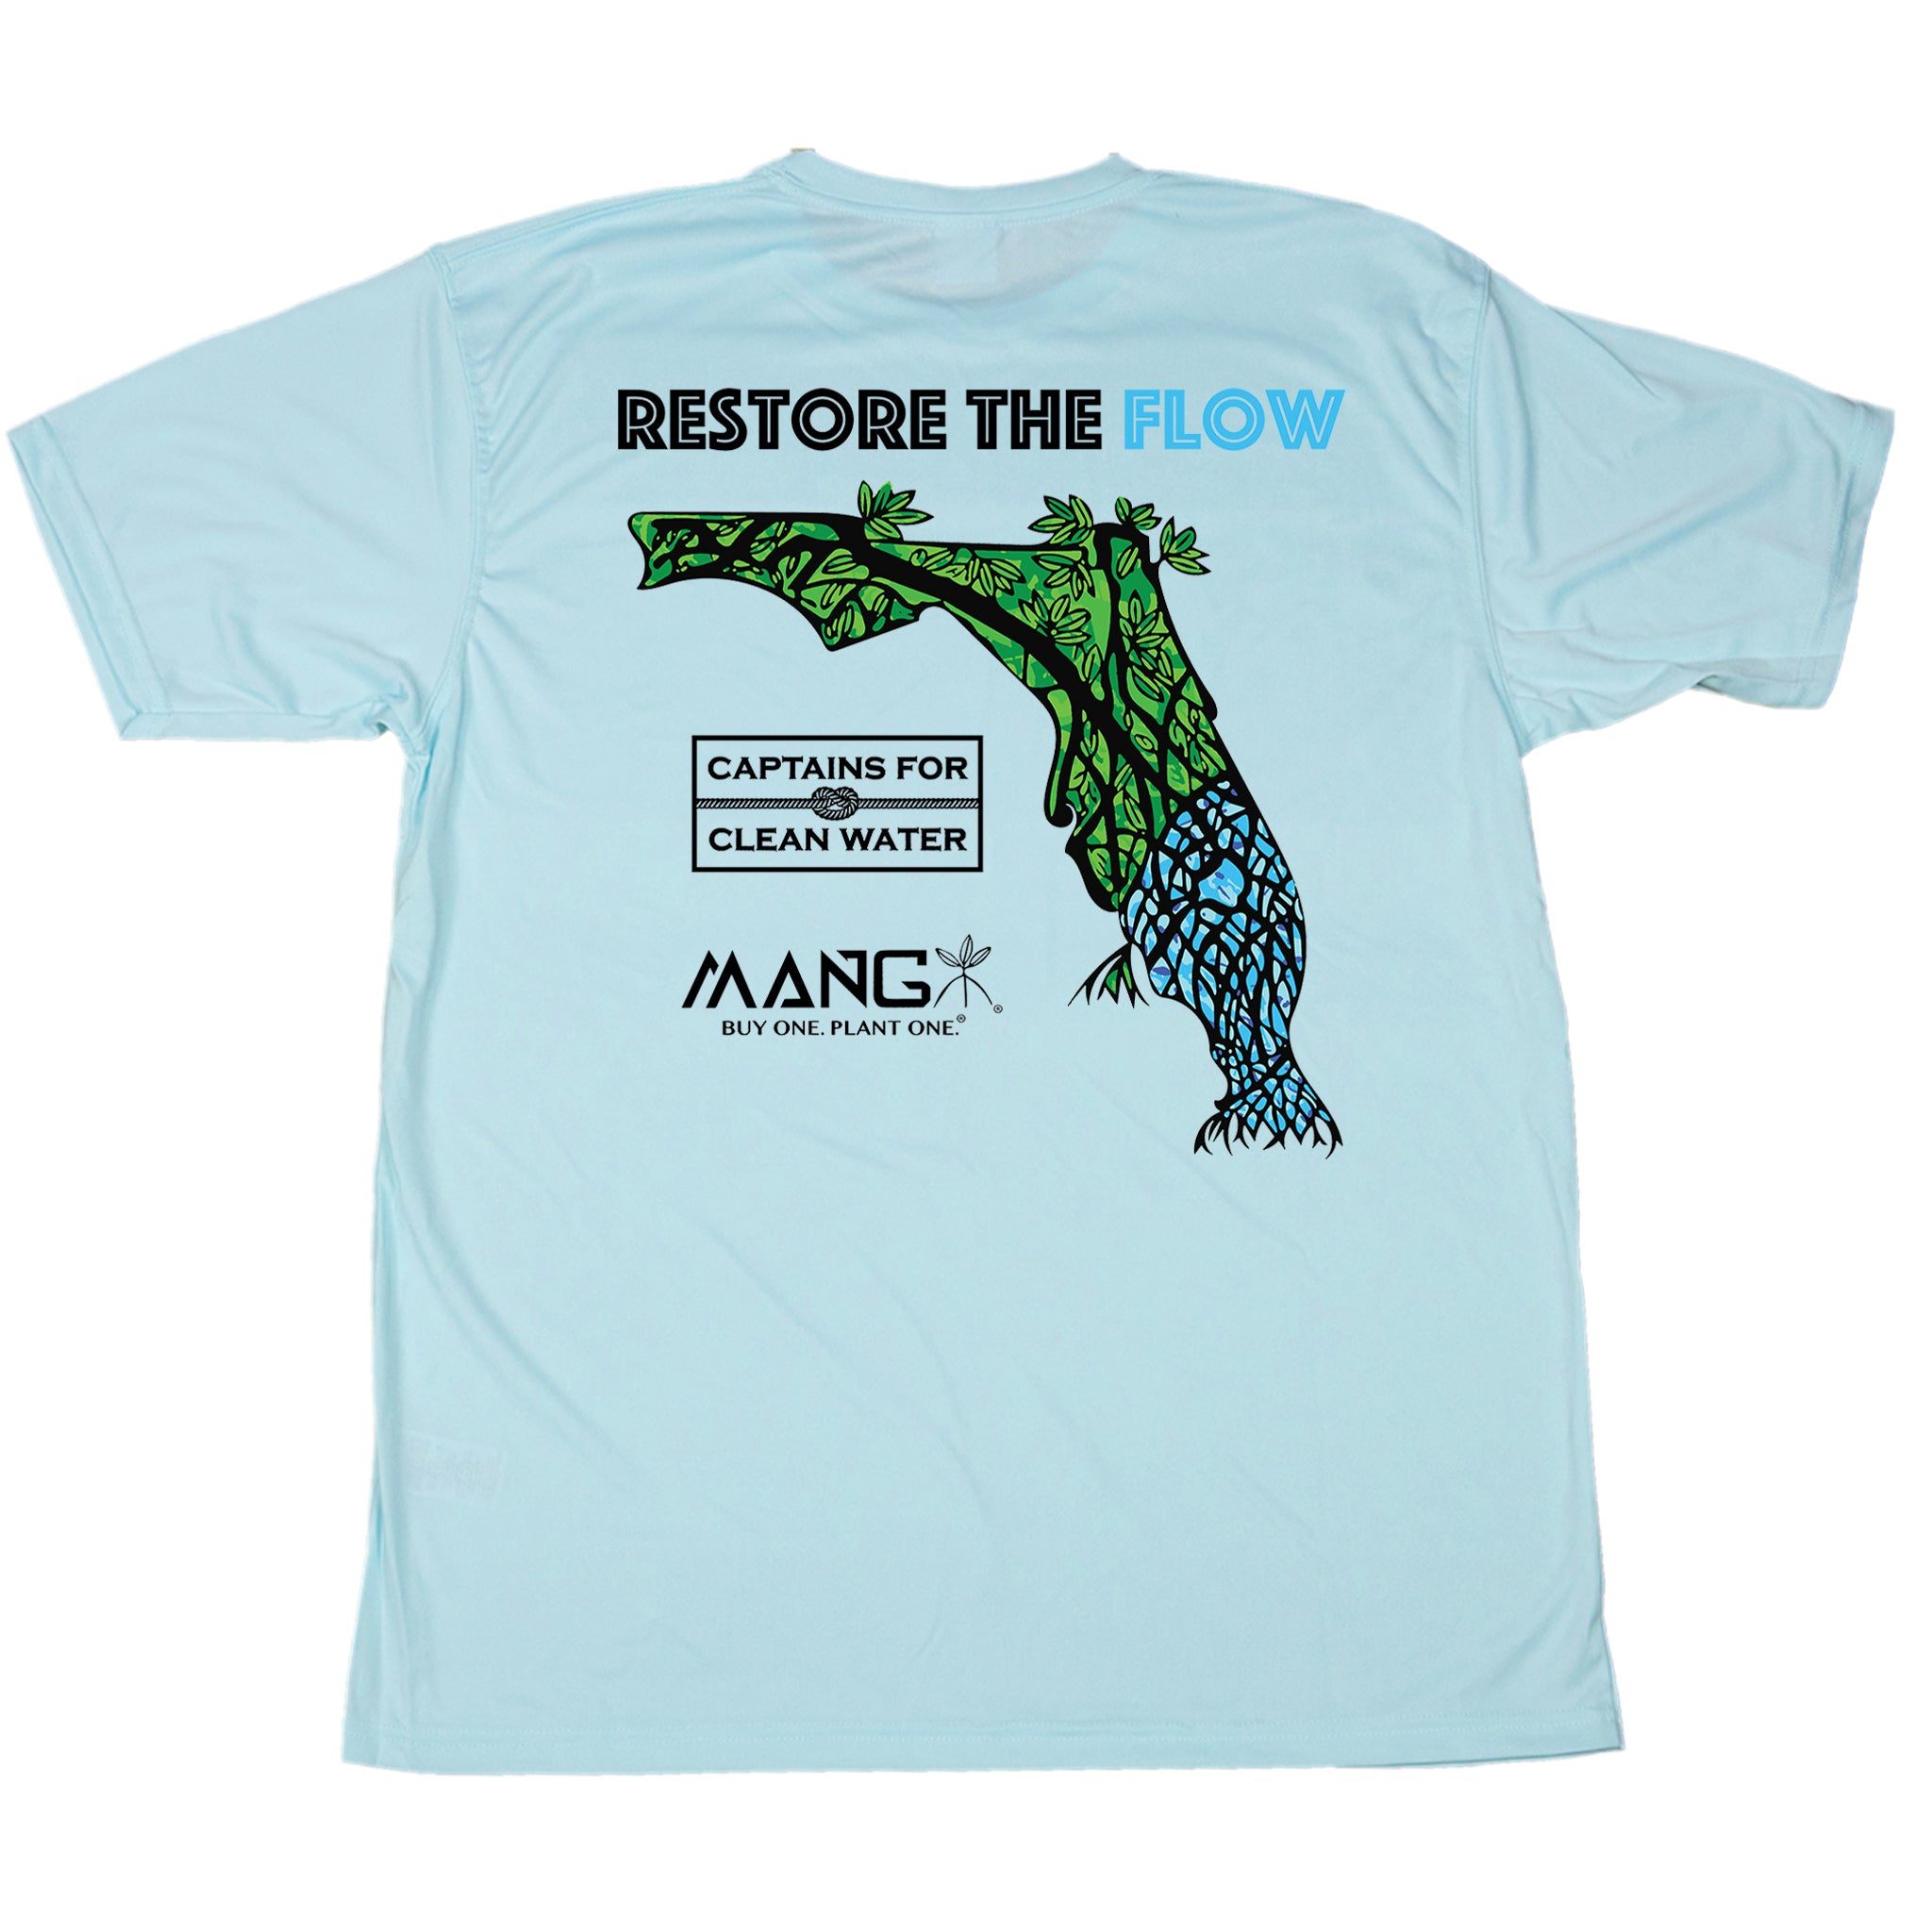 MANG Restore The Flow ™ - SS - XS-Arctic Blue